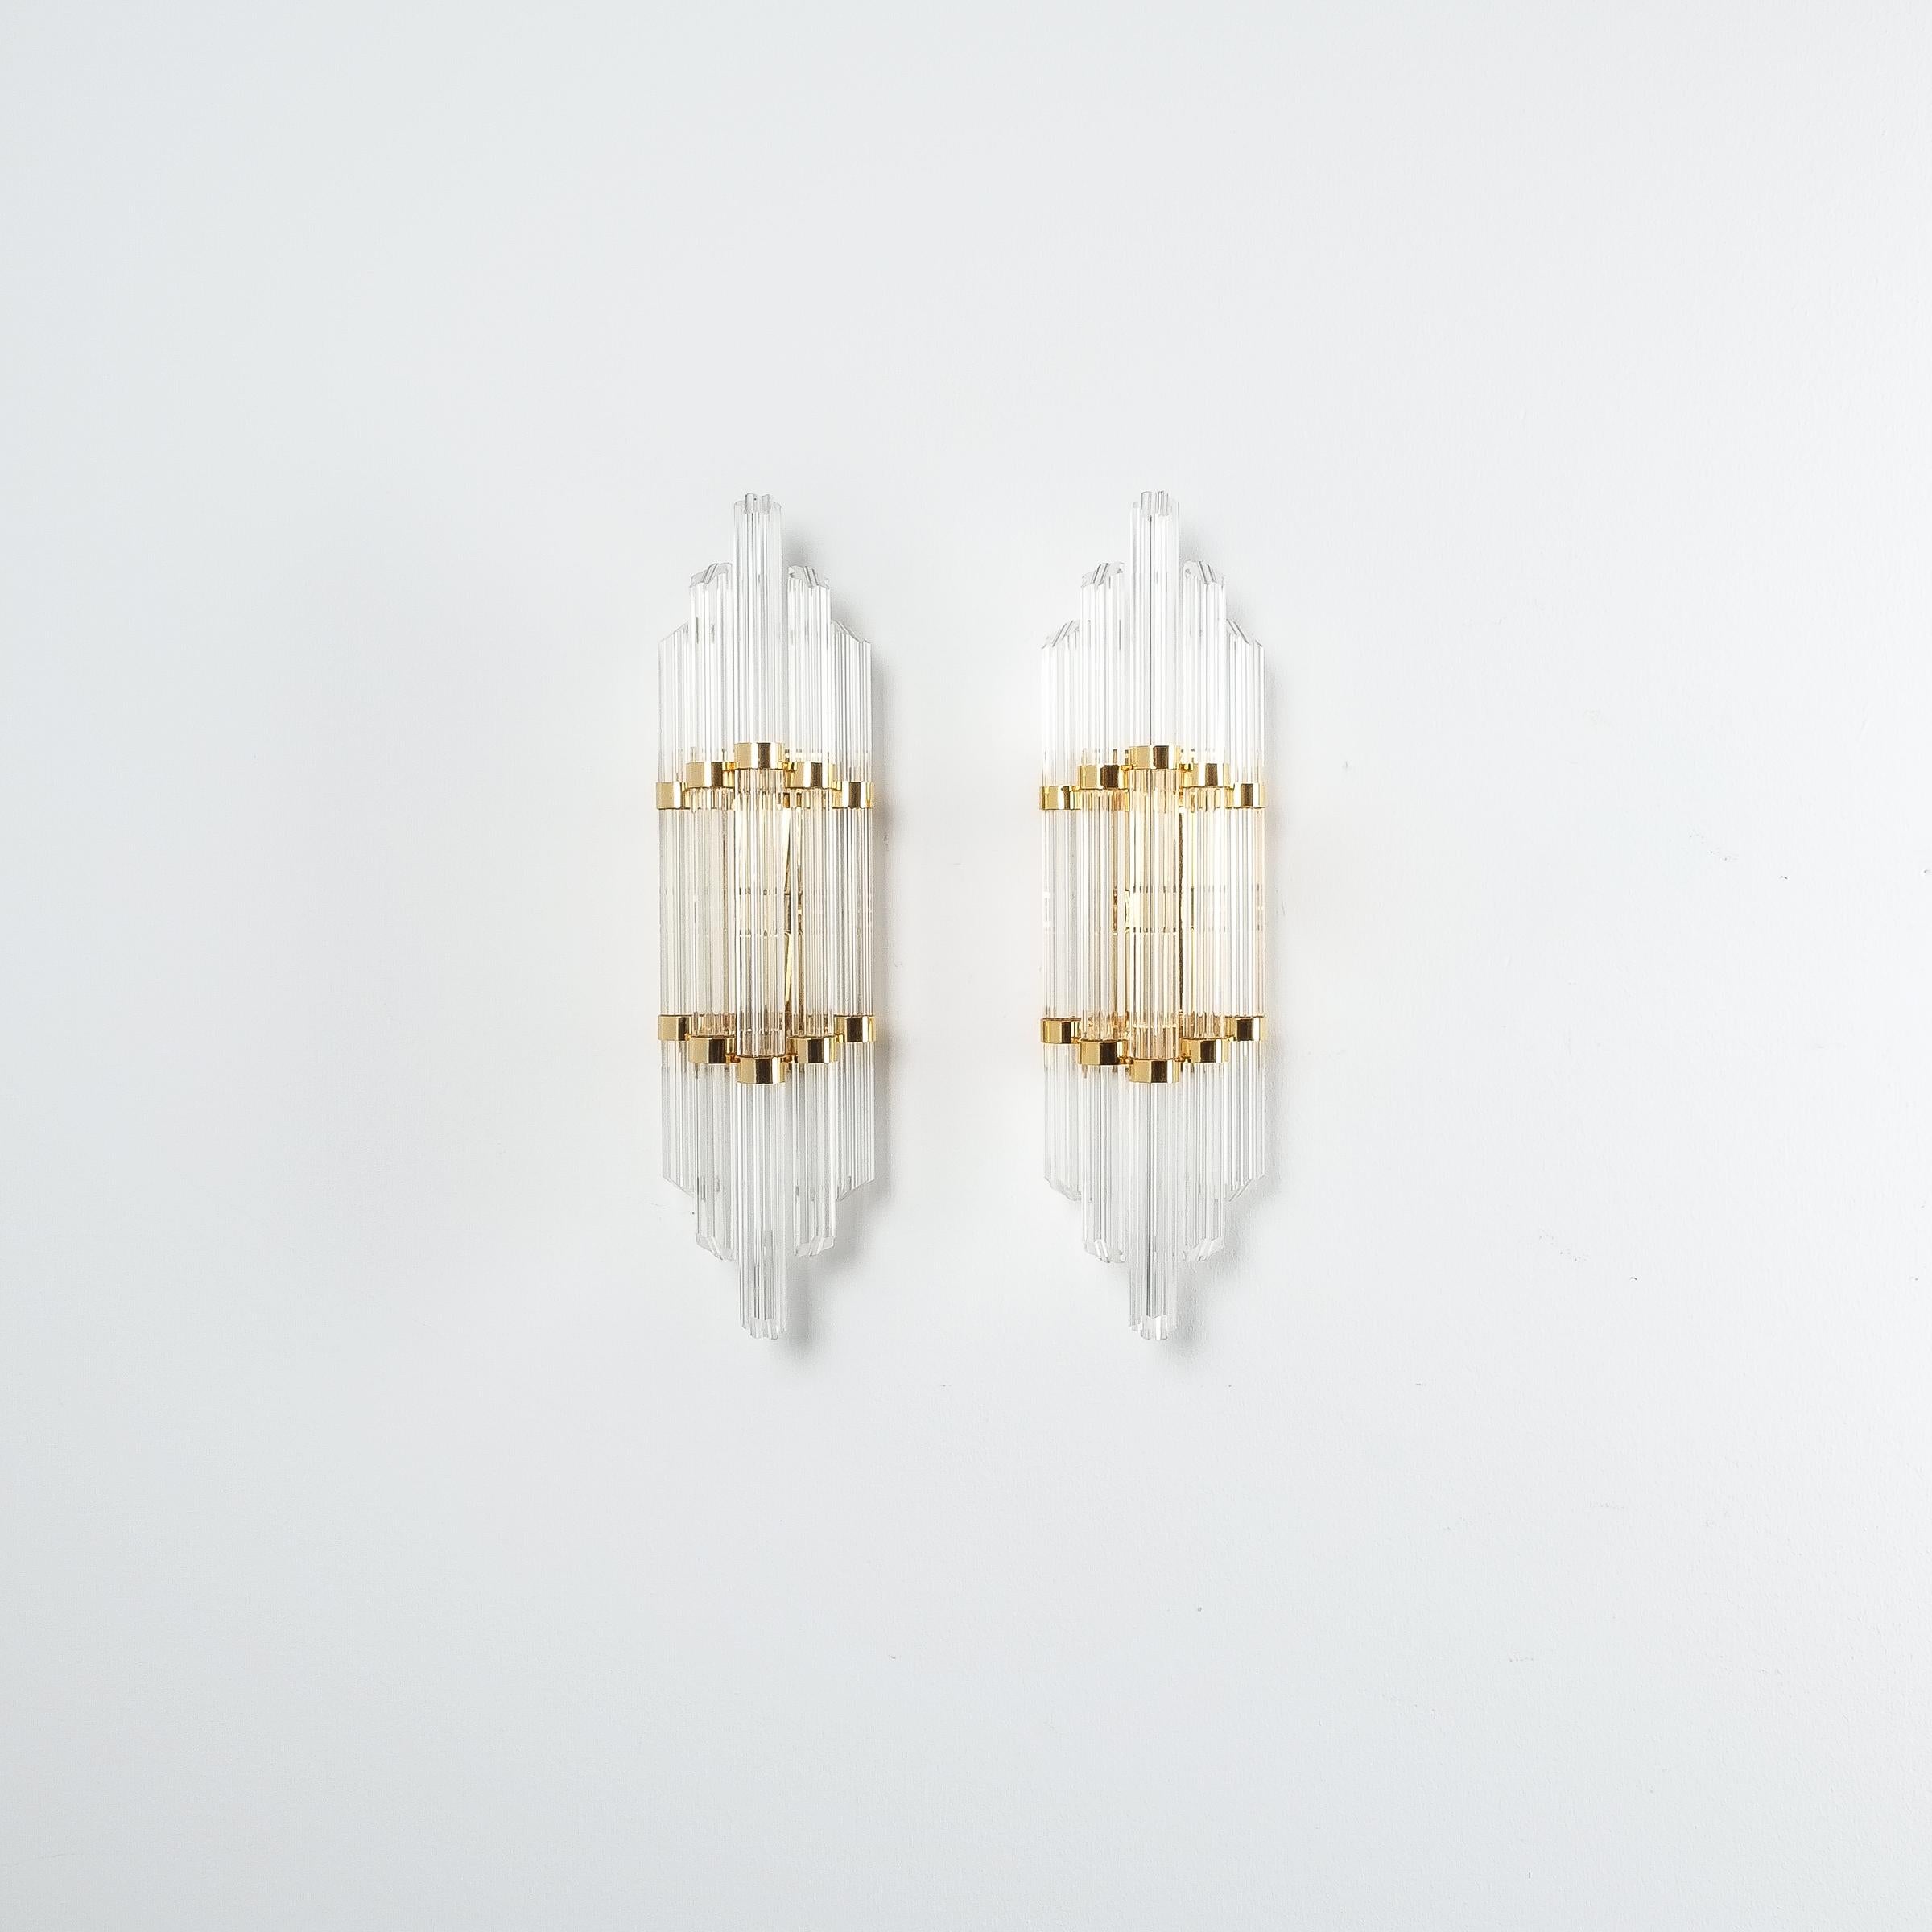 Large Venini style Murano glass and brass wall lamps sconces, 1970. Elegant pair of 18